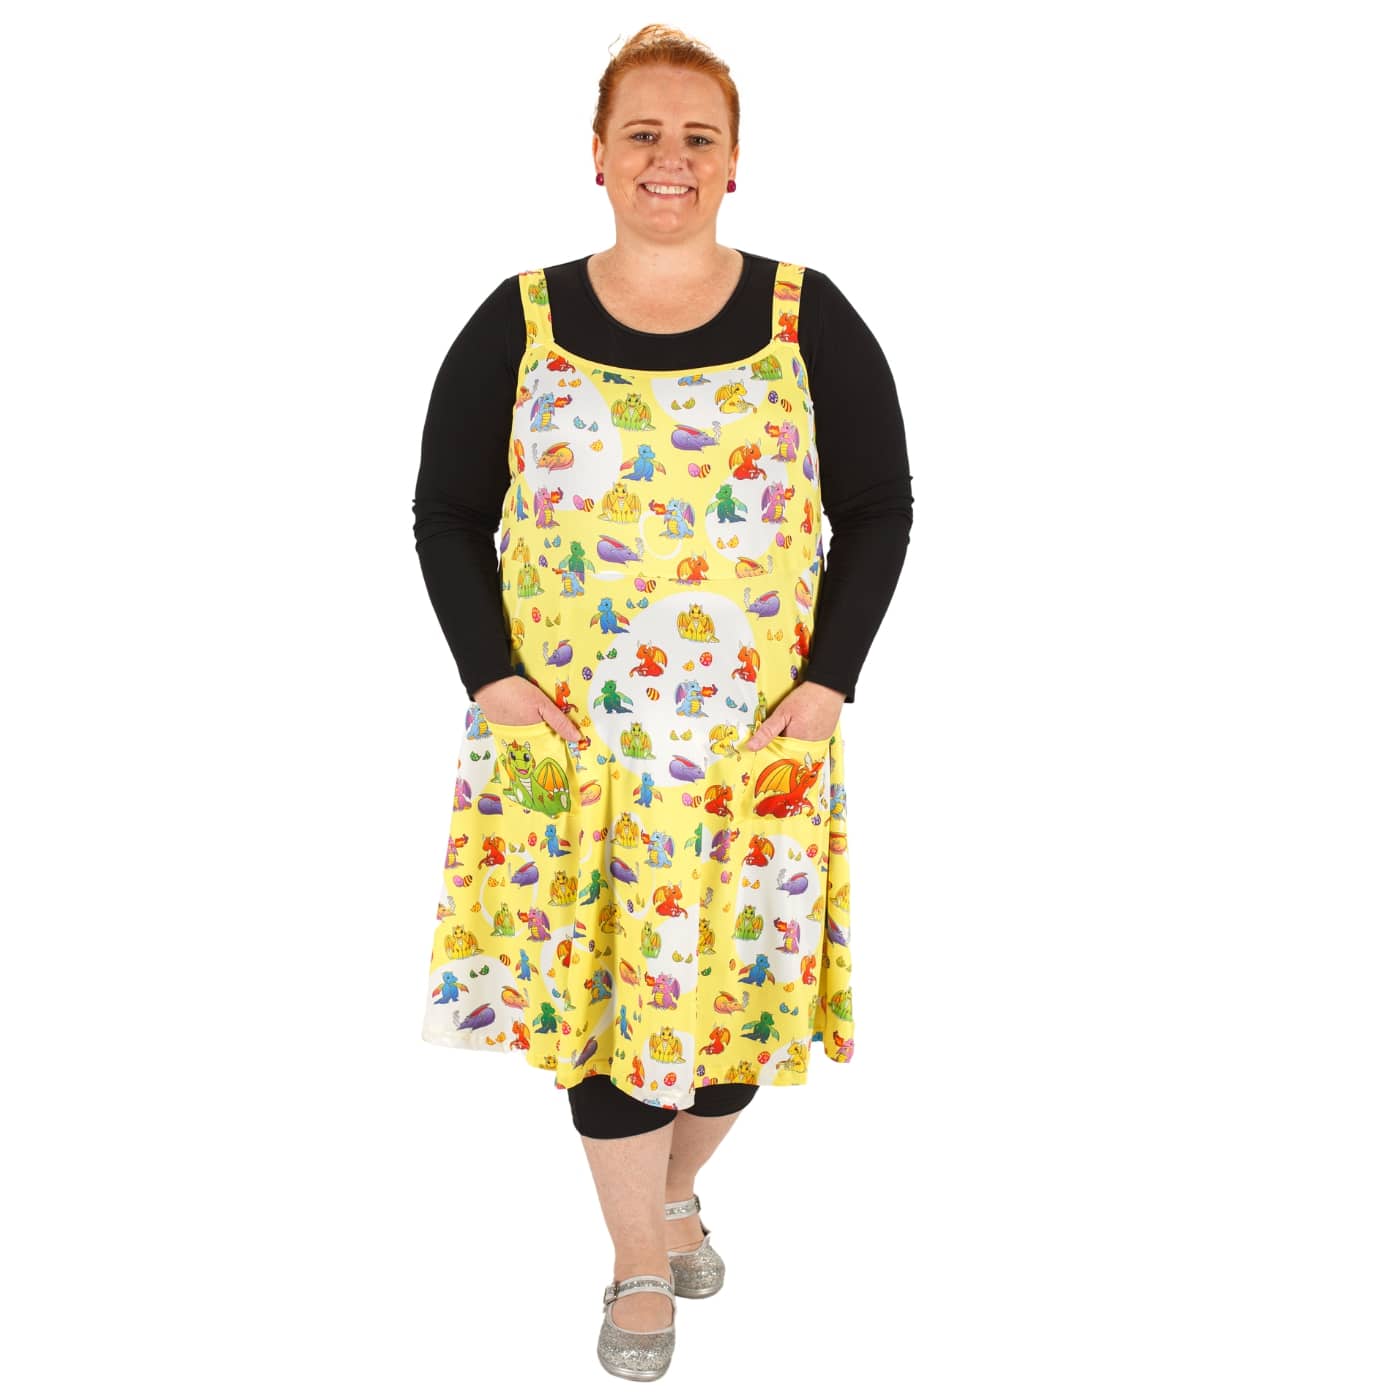 Brood Pinafore by RainbowsAndFairies.com.au (Dragons - Baby Dragon - Pokemon Inspired - Dress With Pockets - Pinny - Kitsch - Vintage Inspired) - SKU: CL_PFORE_BROOD_ORG - Pic-04